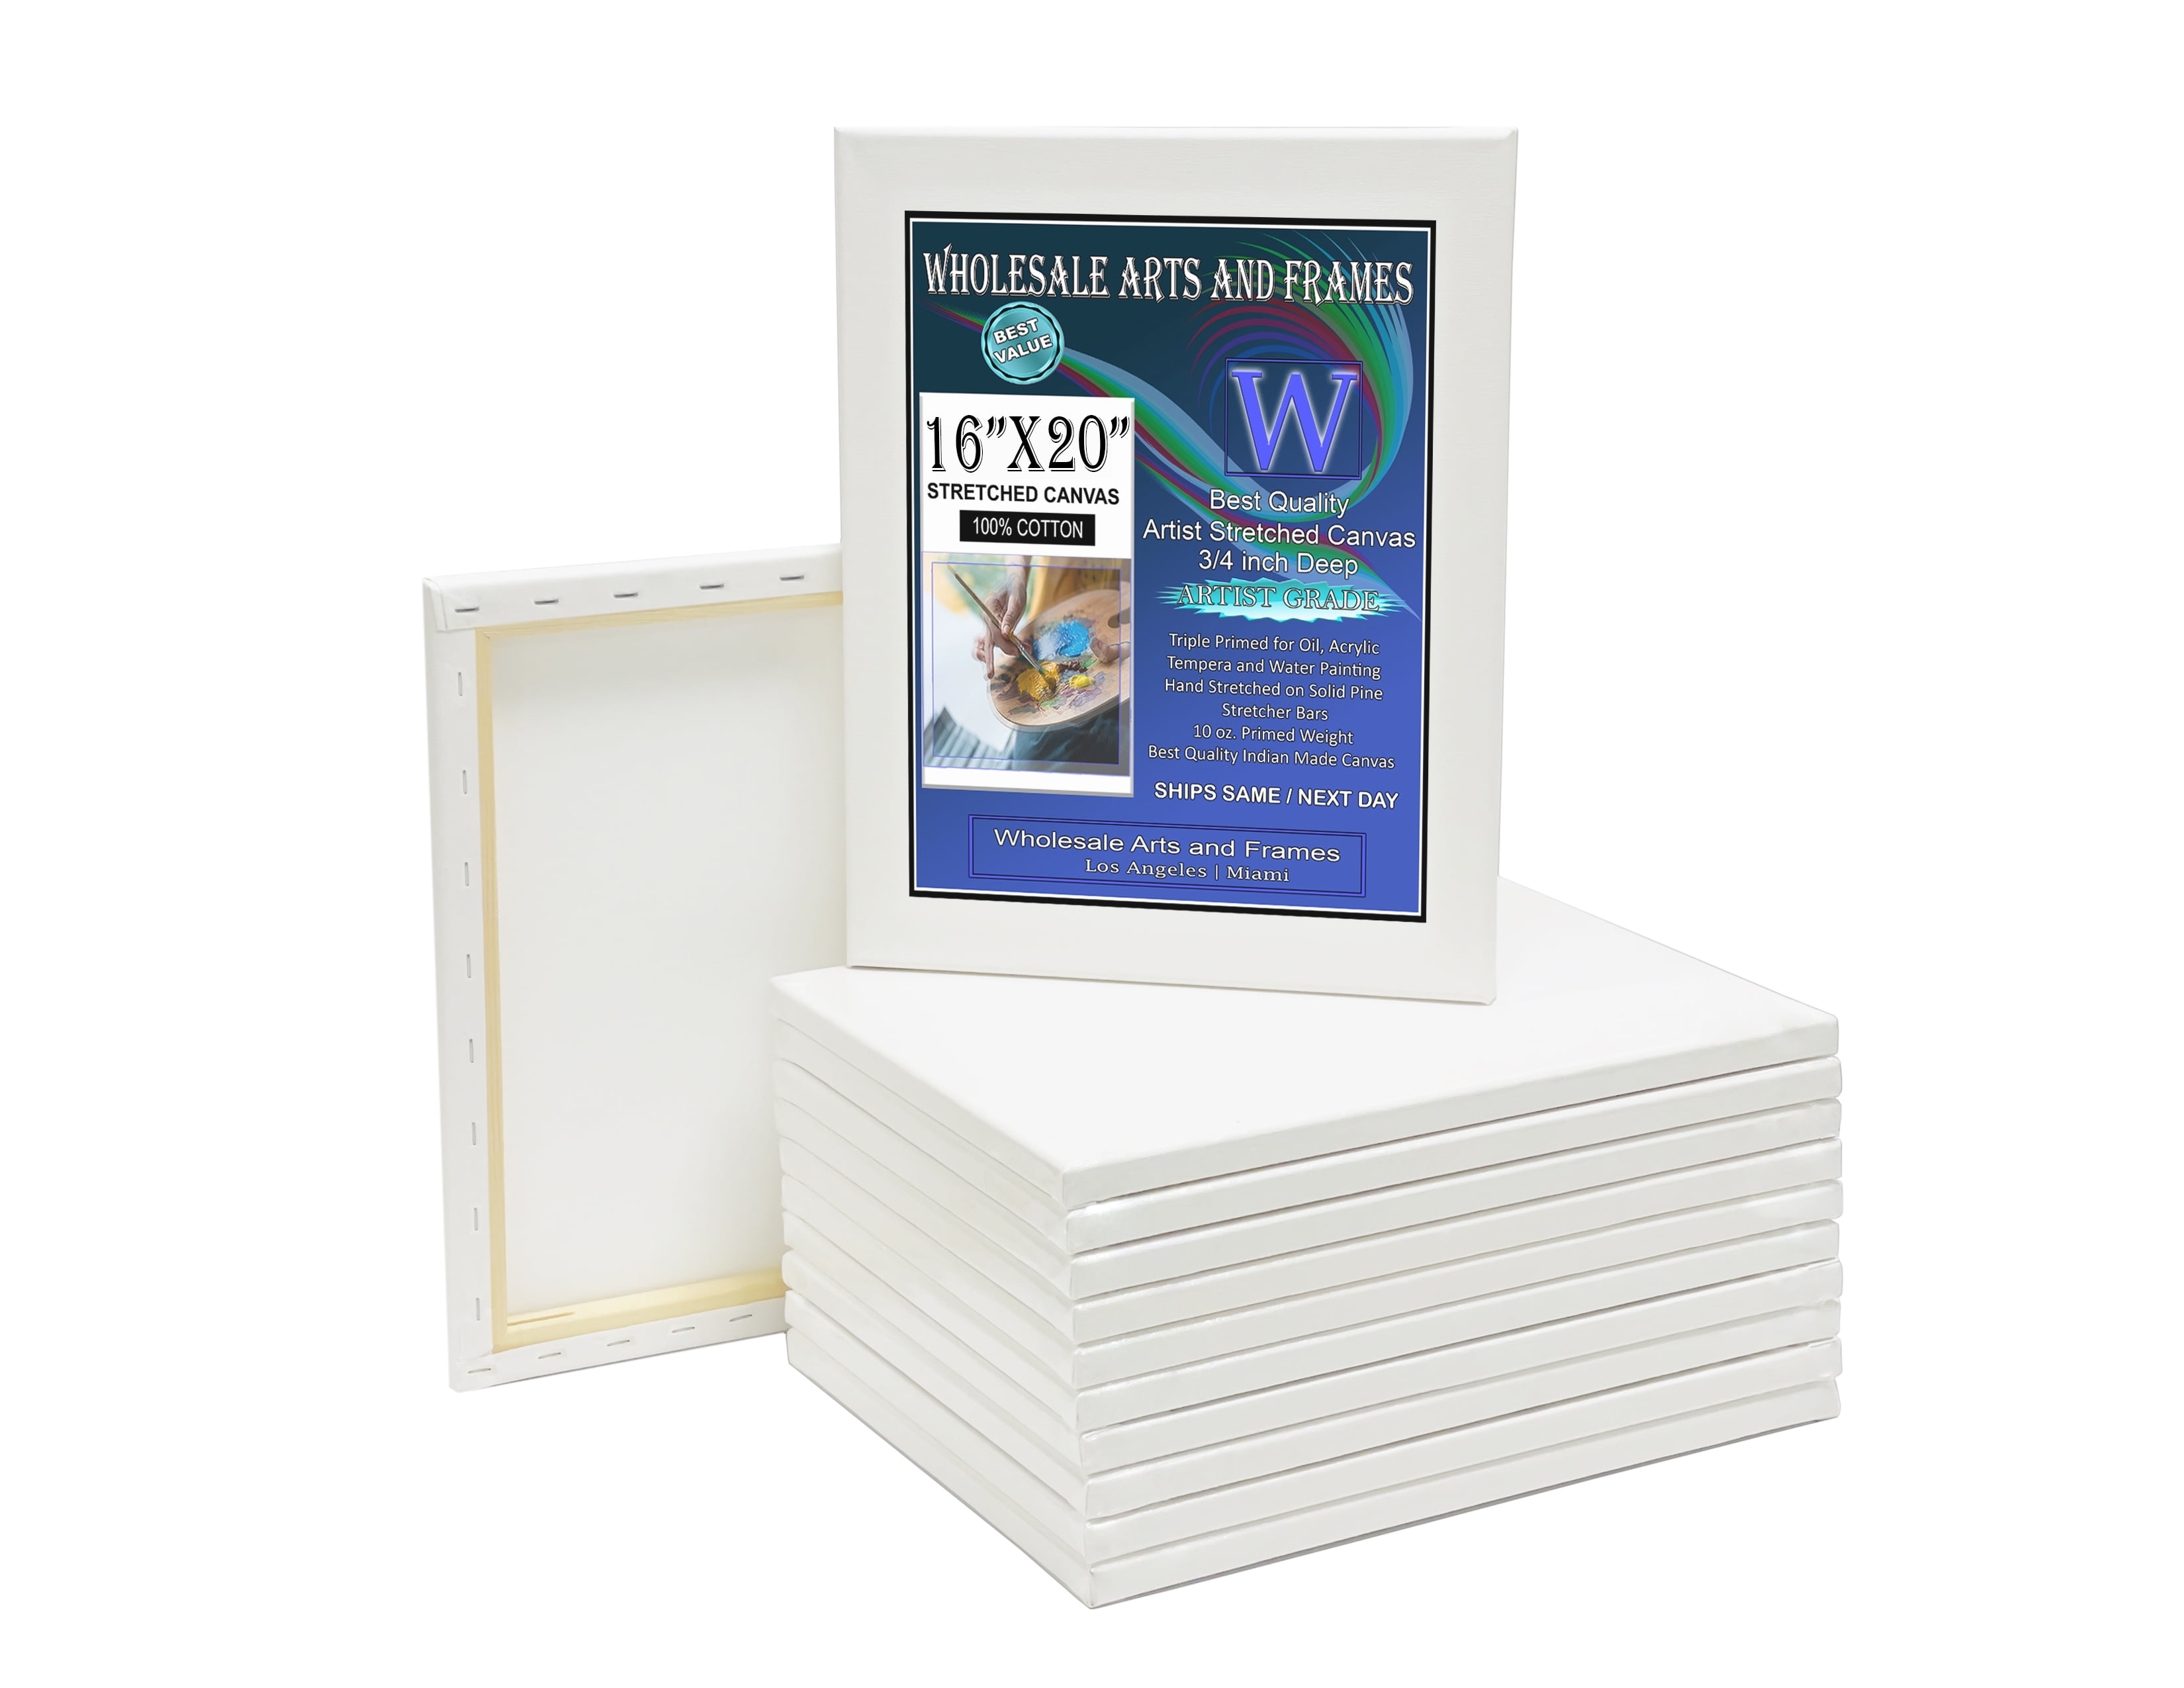 16 x 20 Canvases we offer complete line of paint and sip supplies - TD  ART SUPPLY